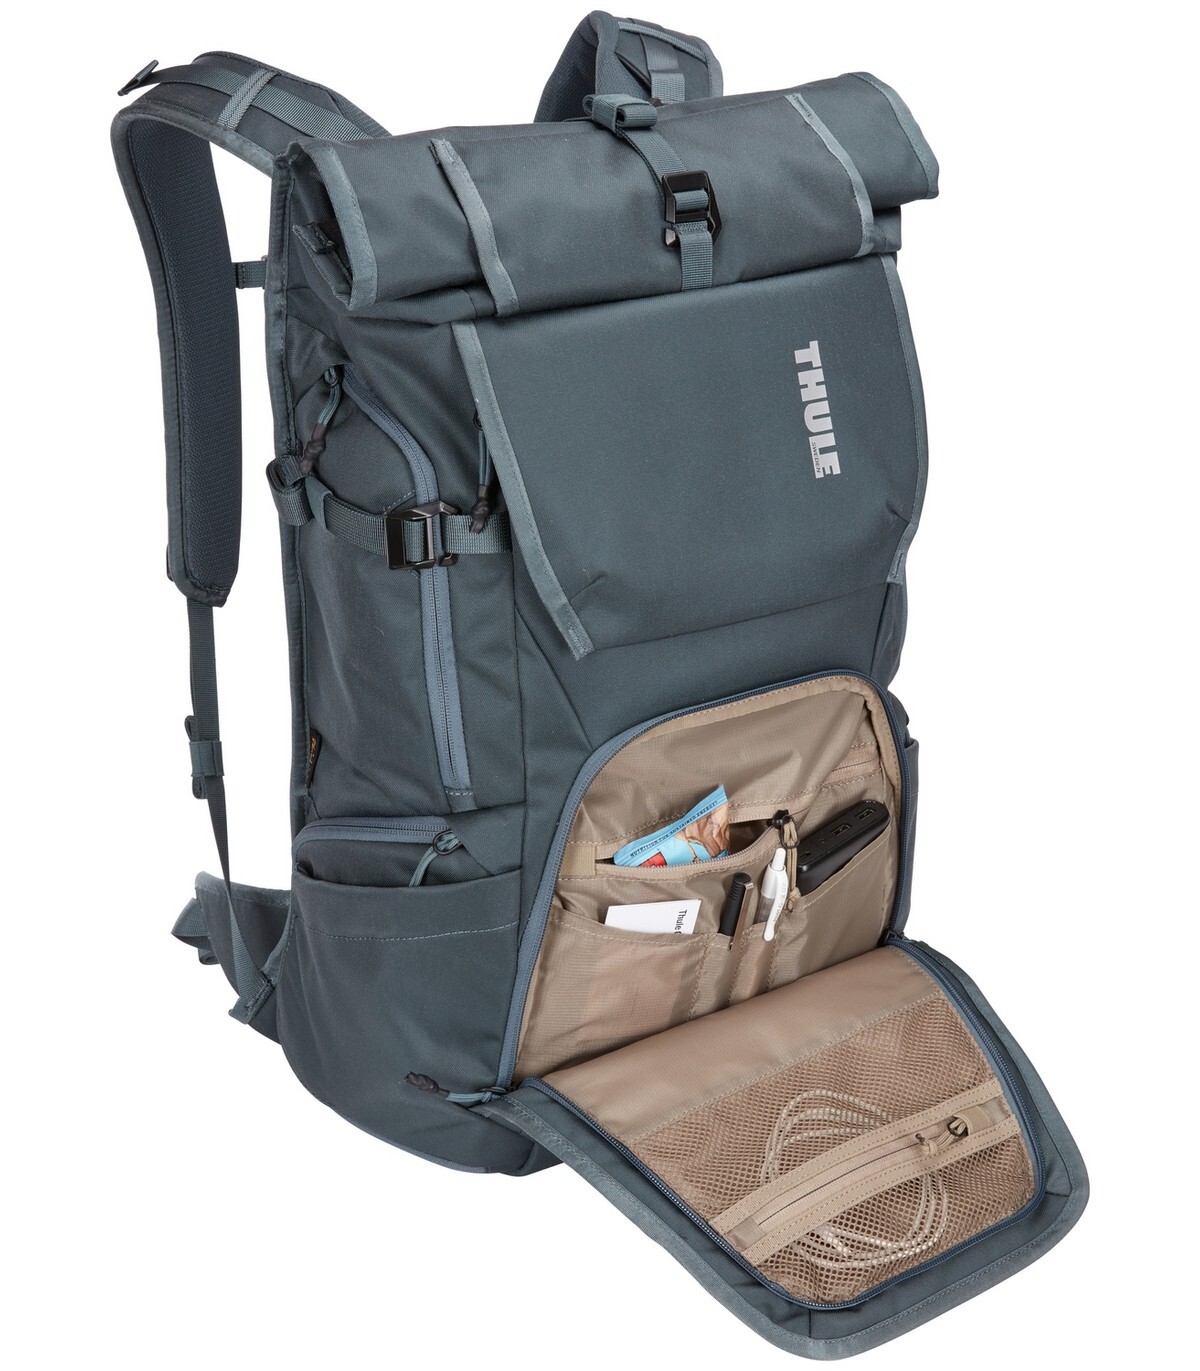 THULE Covert TCDK-232 / Backpack 32L